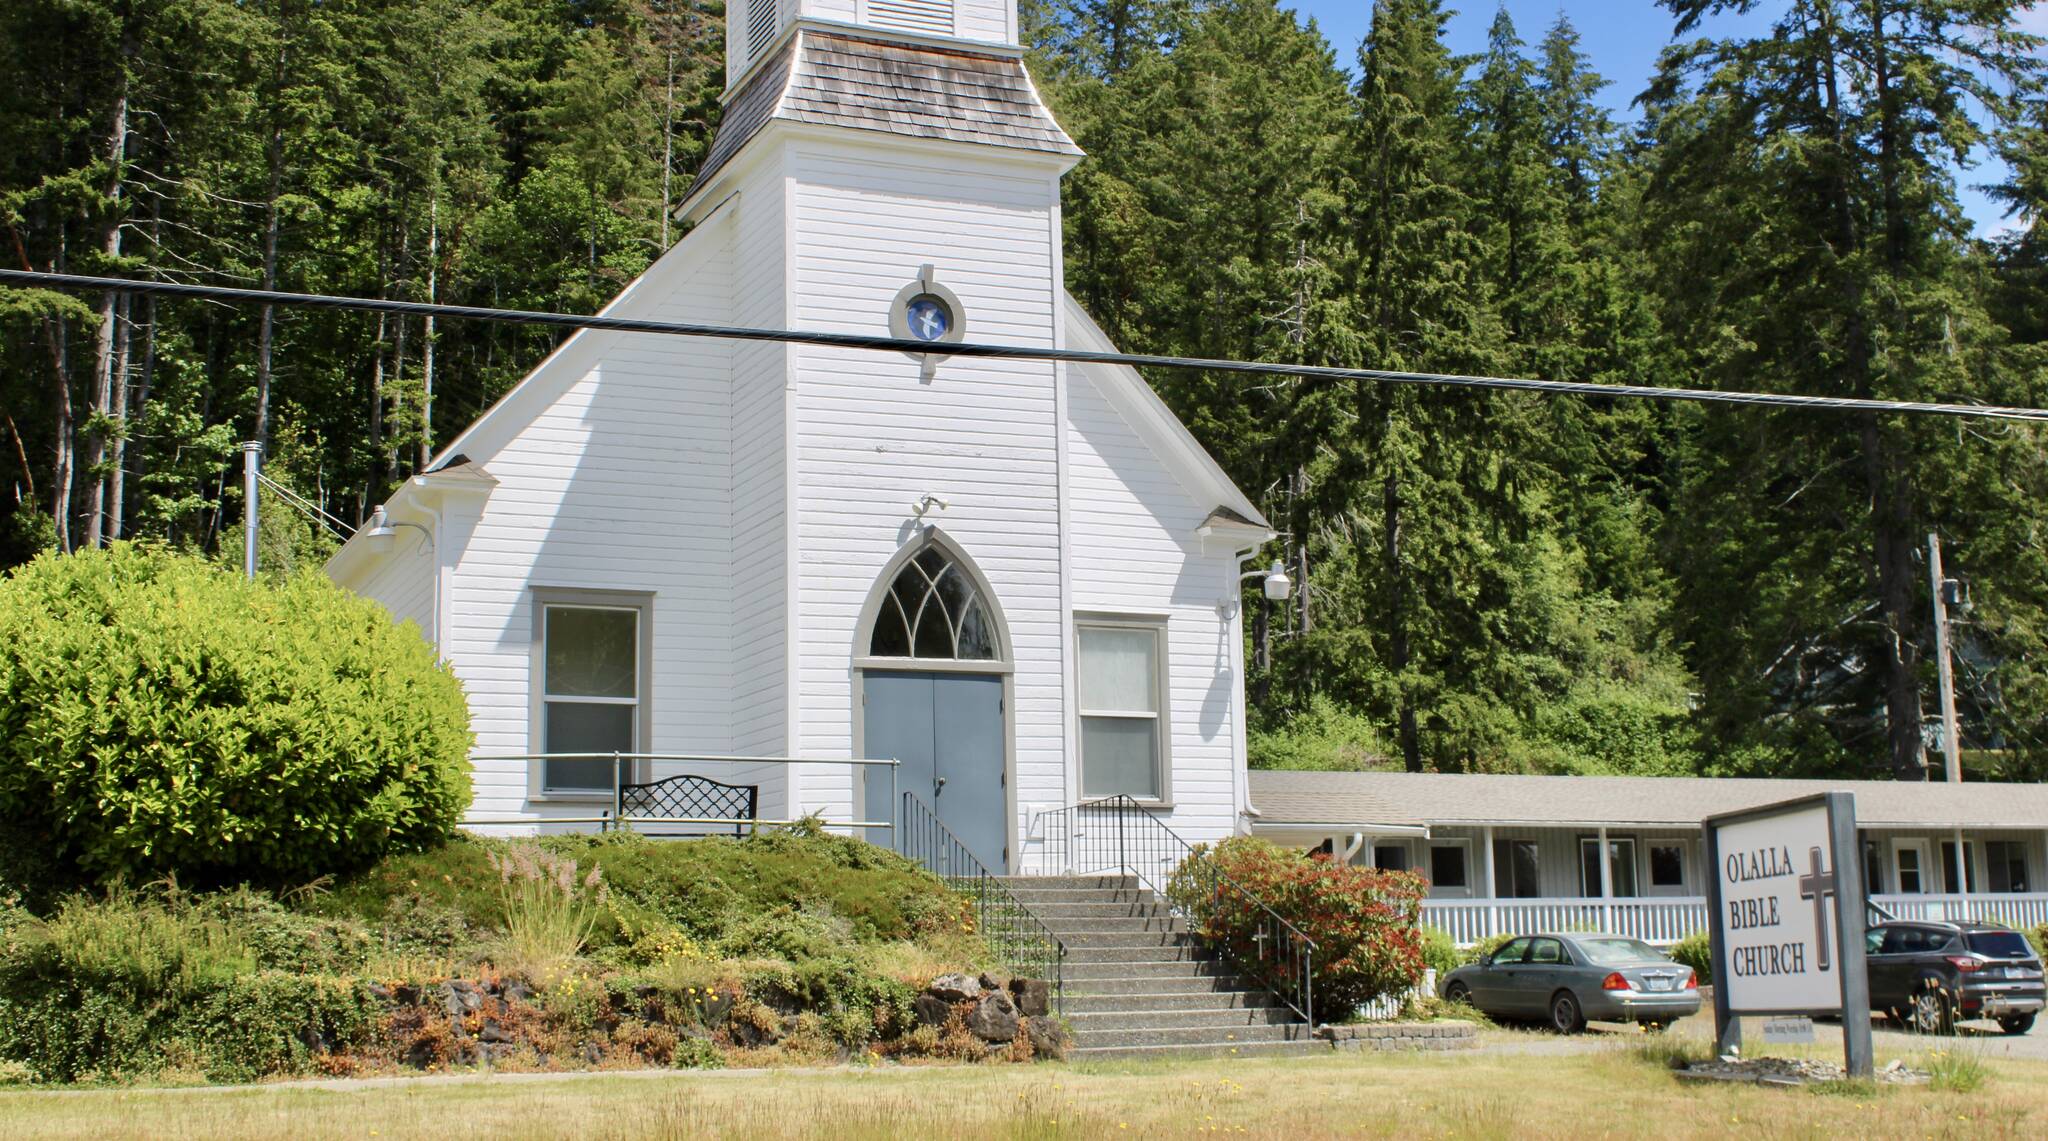 Elisha Meyer/Kitsap News Group
Olalla’s historic building of worship is currently occupied by the Olalla Bible Church.